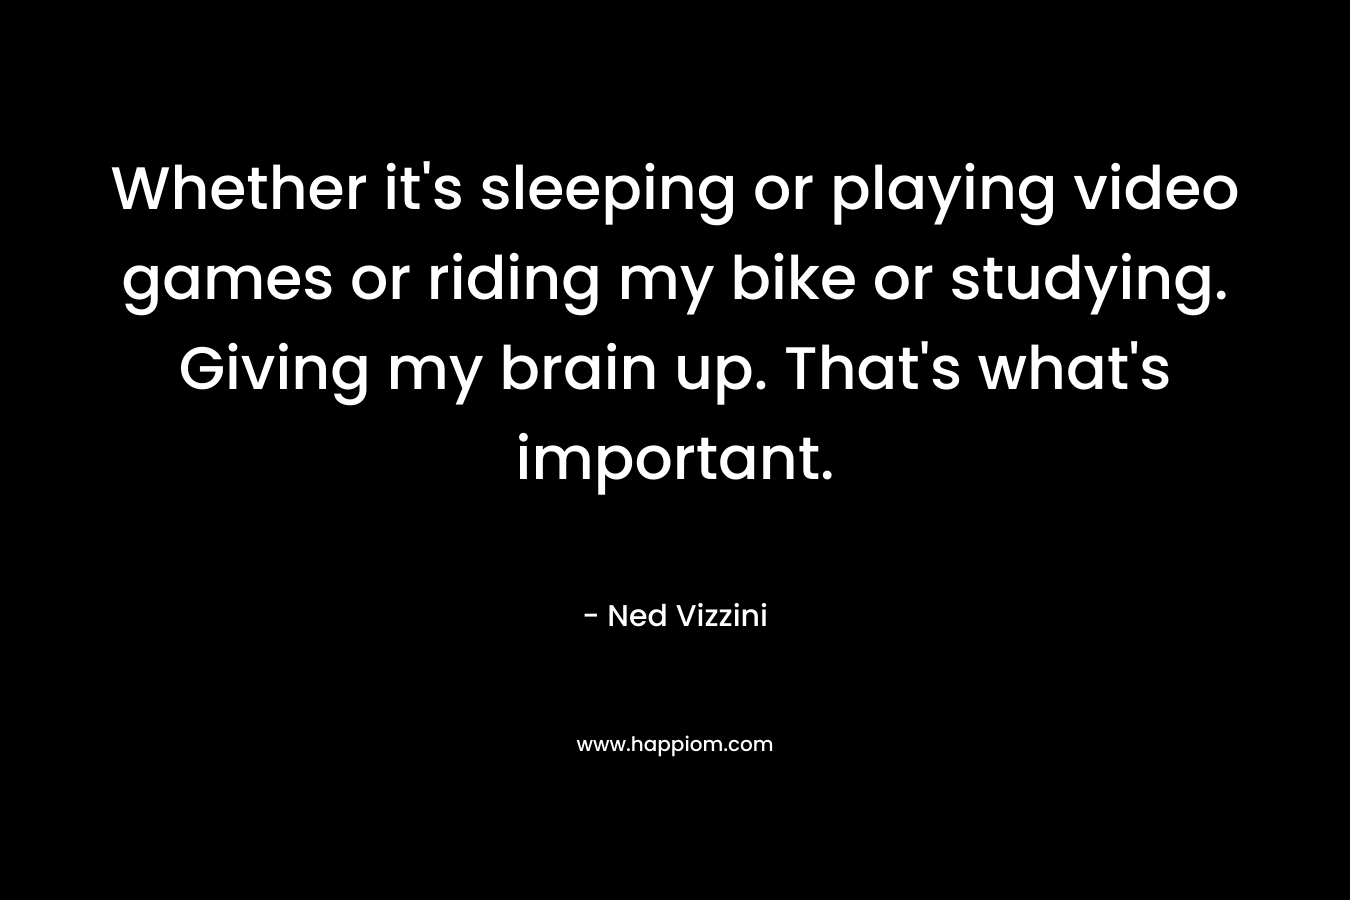 Whether it's sleeping or playing video games or riding my bike or studying. Giving my brain up. That's what's important.